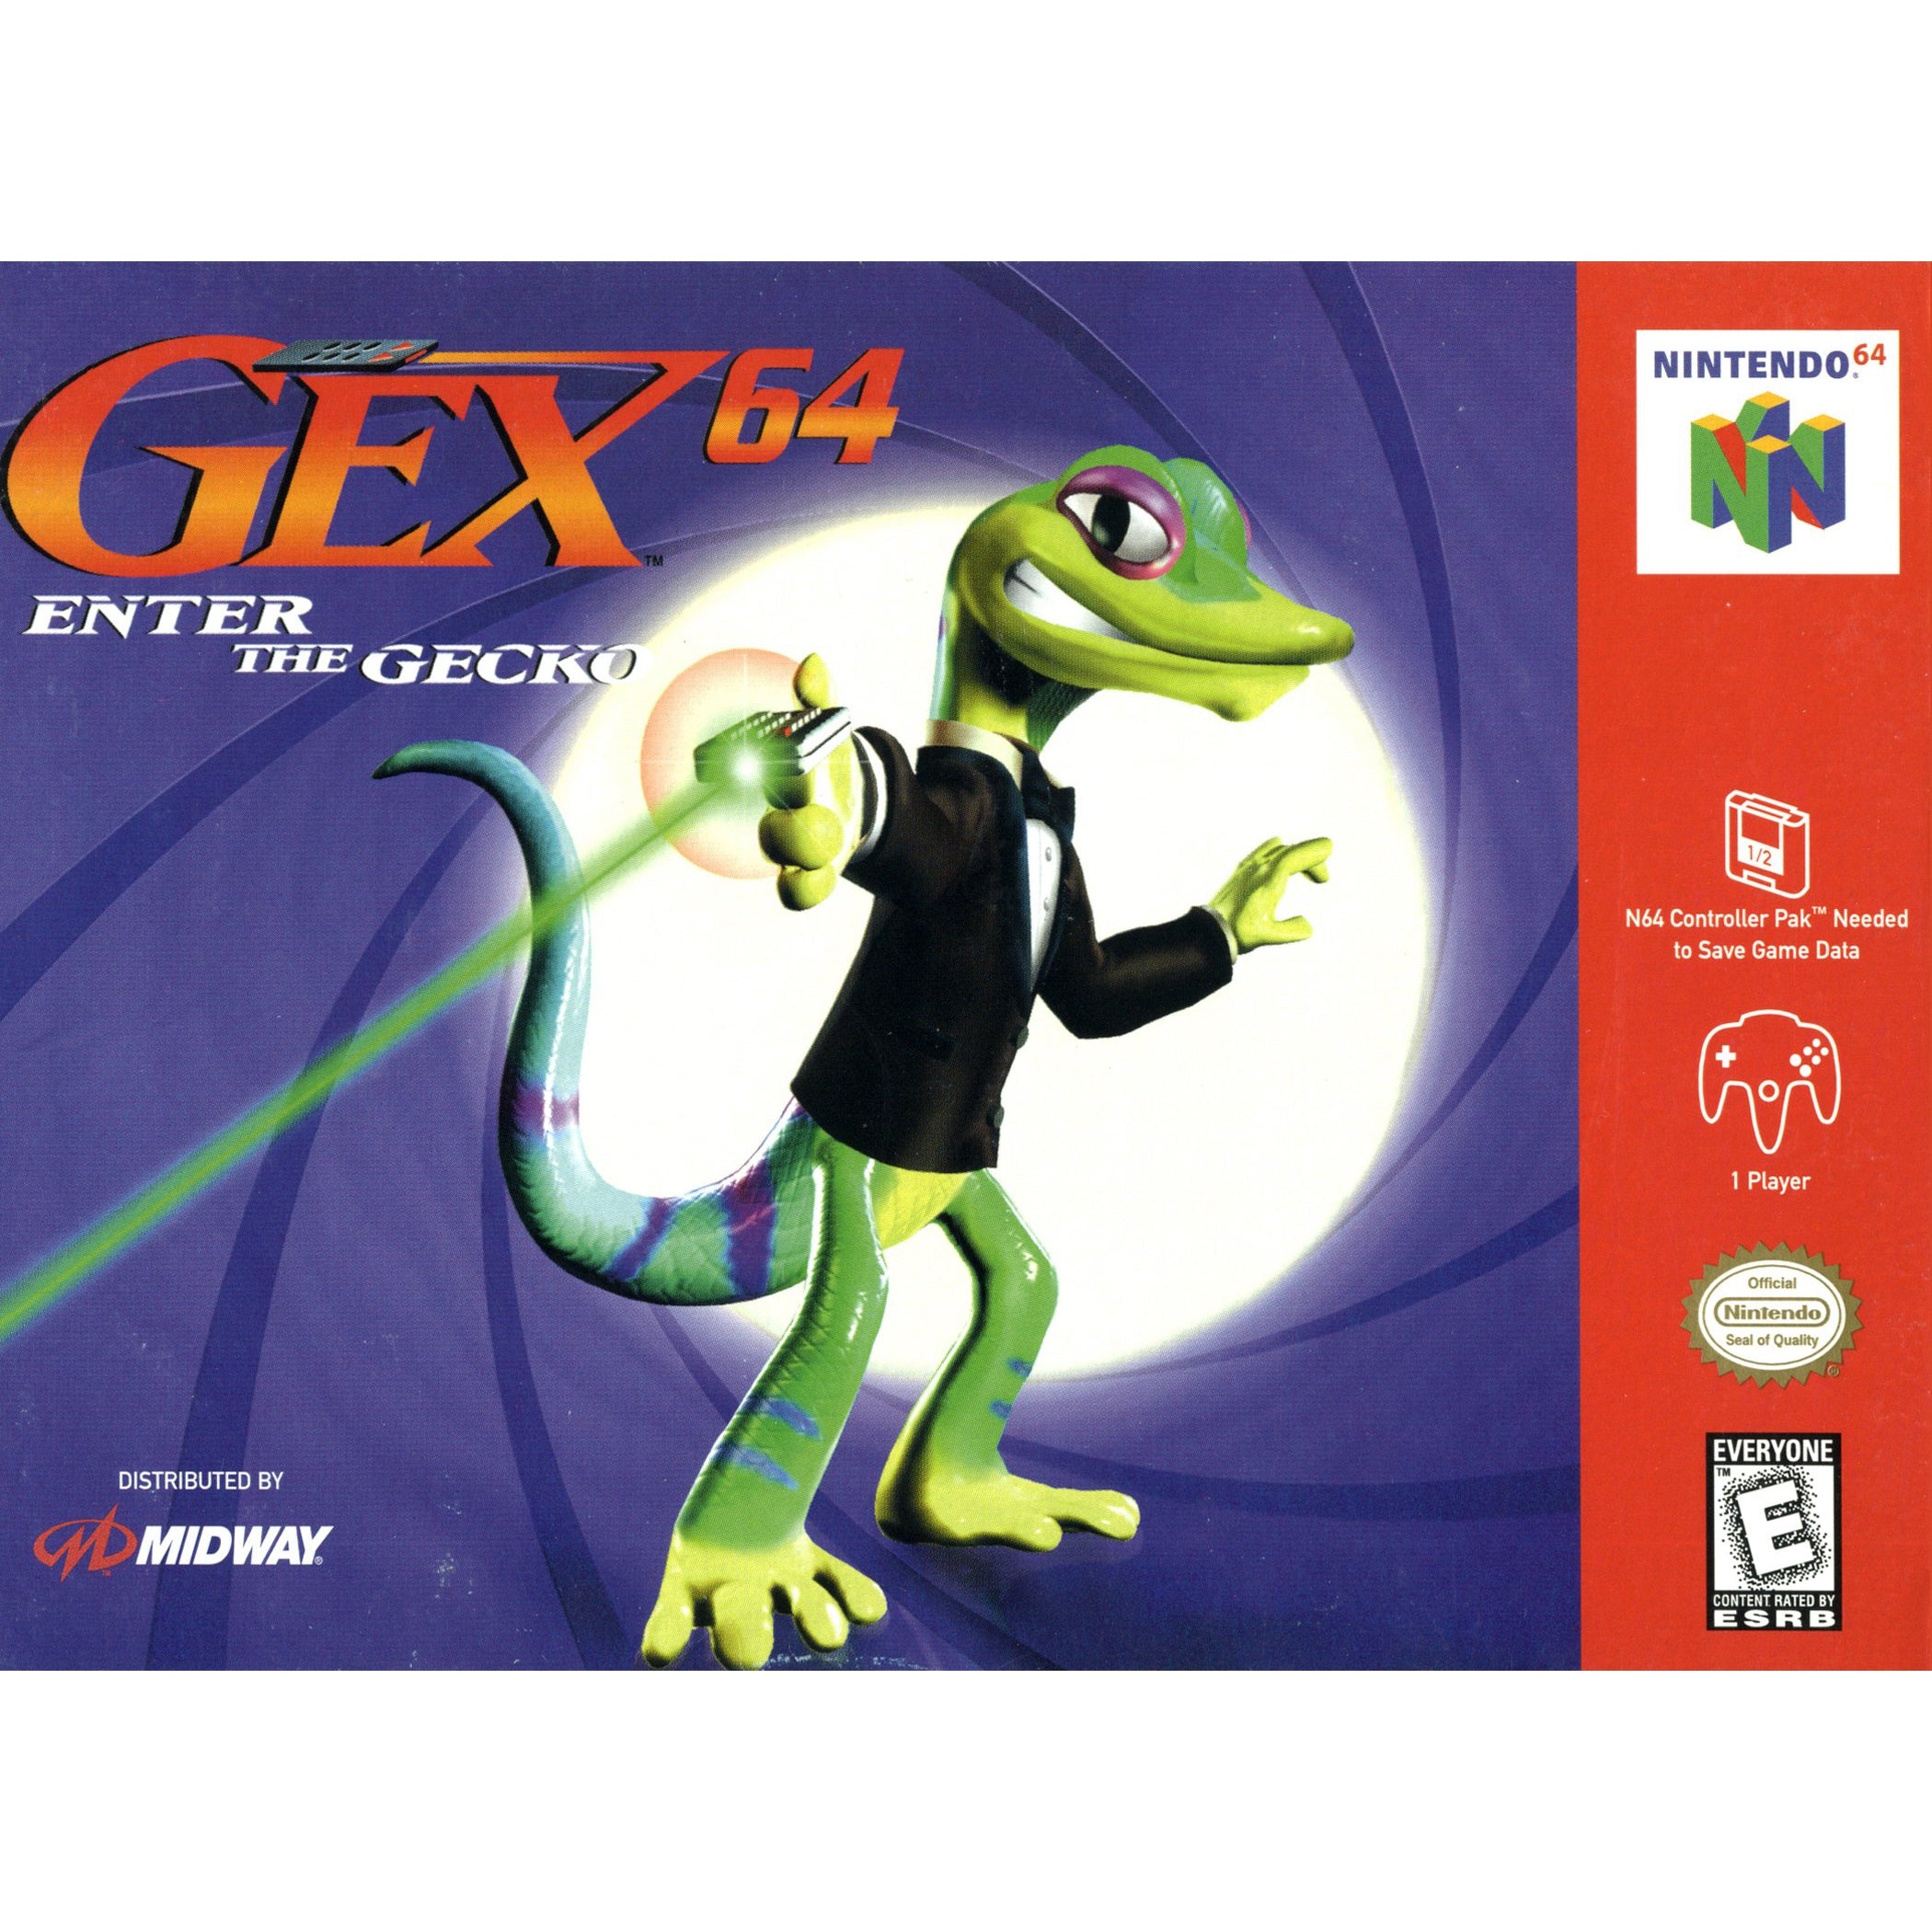 Gex 64: Enter the Gecko - Authentic Nintendo 64 (N64) Game Cartridge